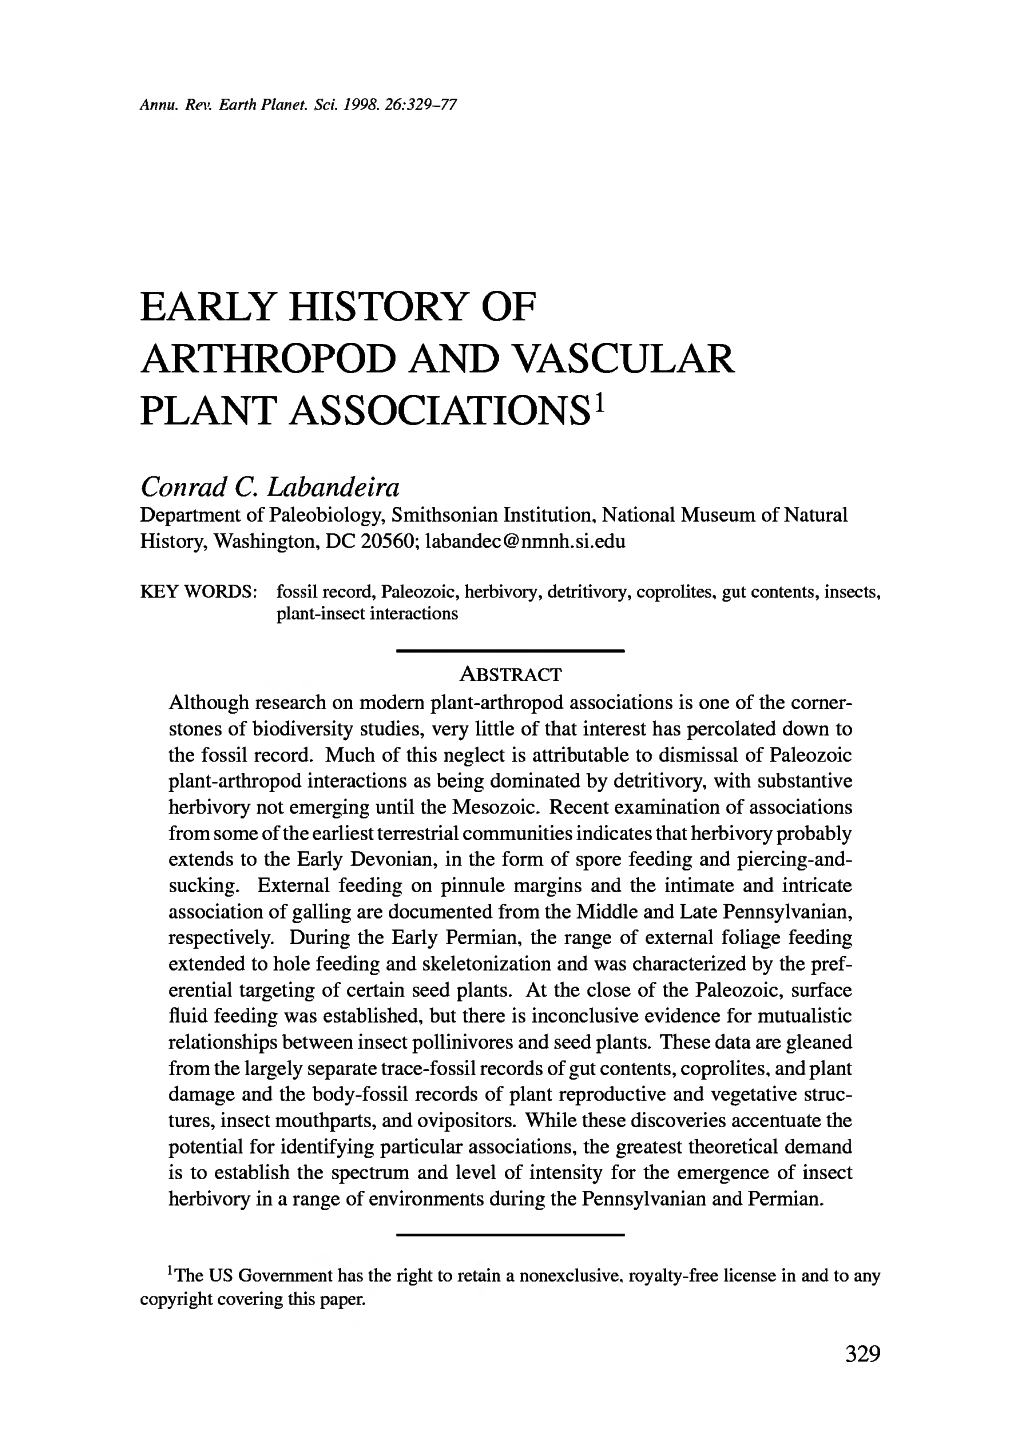 Early History of Arthropod and Vascular Plant Associations!